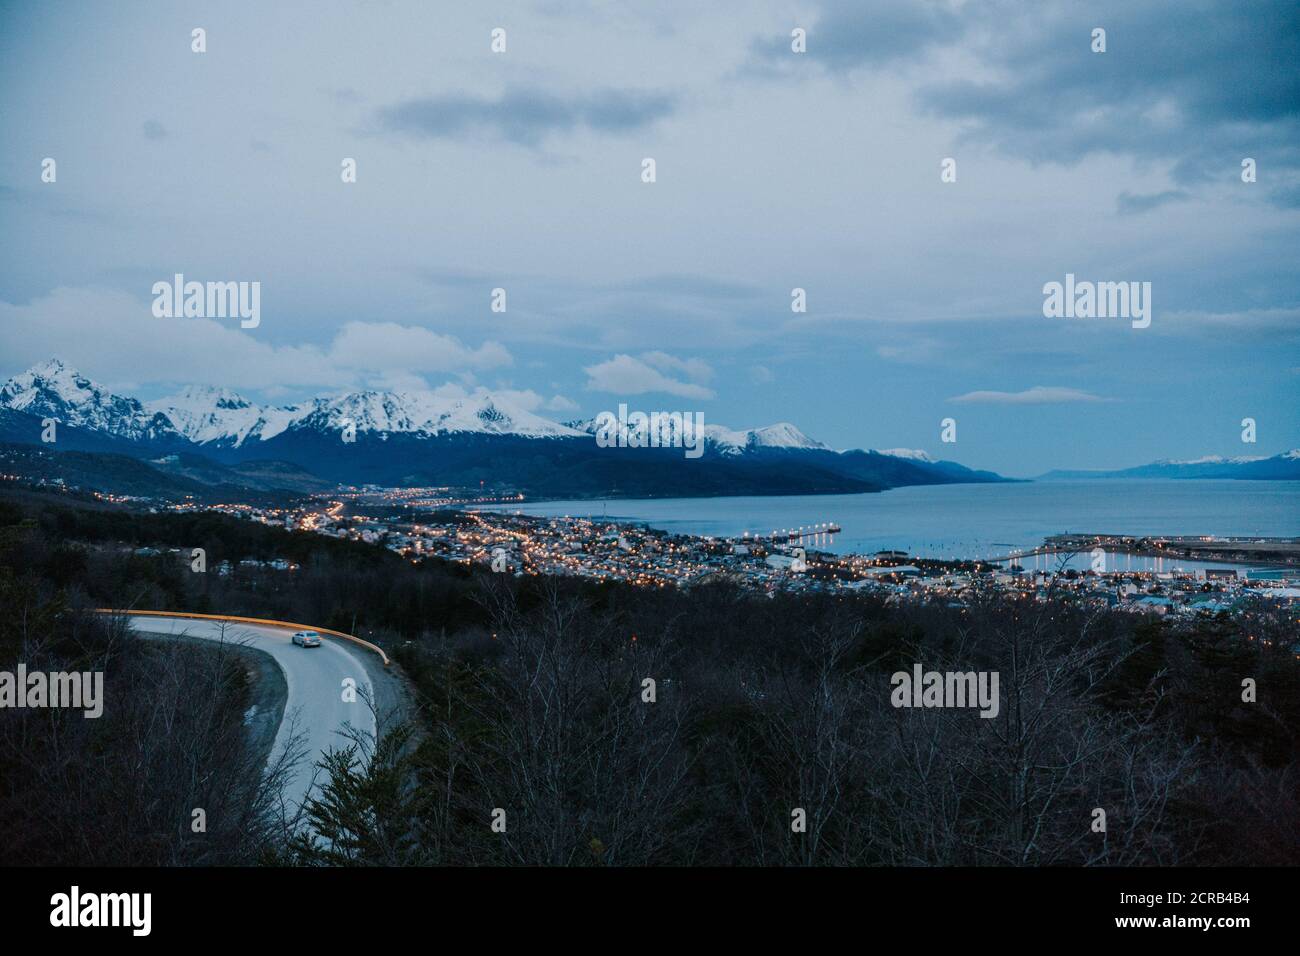 Pictures of landscapes of Ushuaia - End of the world - Argentina Stock Photo